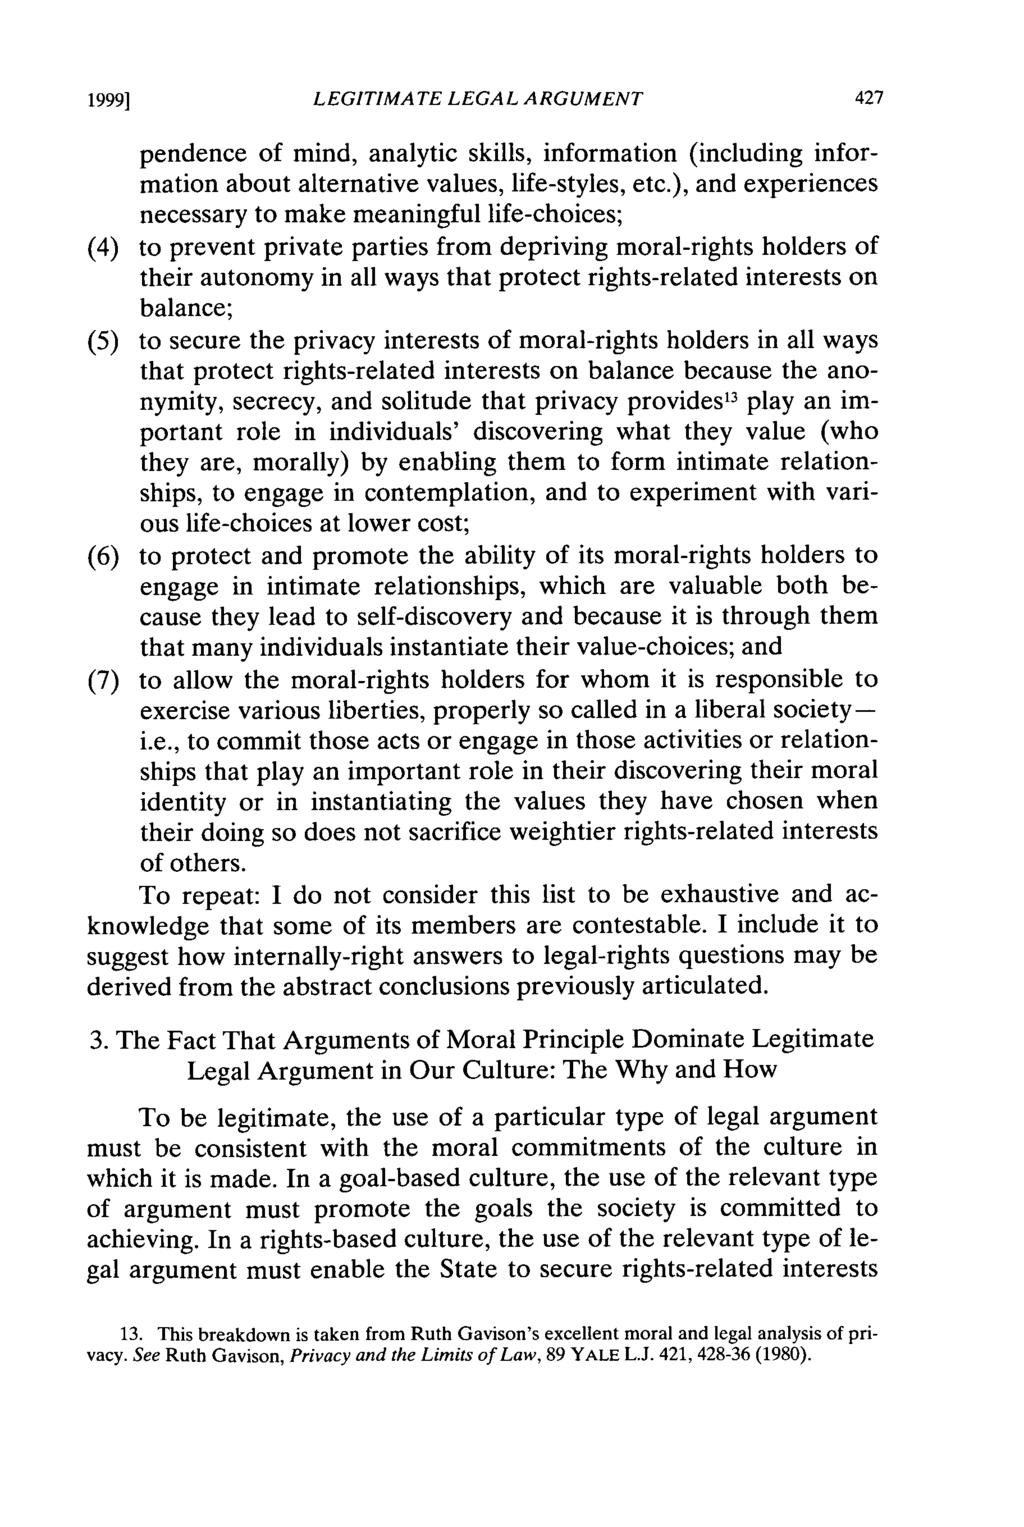 19991 LEGITIMATE LEGAL ARGUMENT pendence of mind, analytic skills, information (including information about alternative values, life-styles, etc.